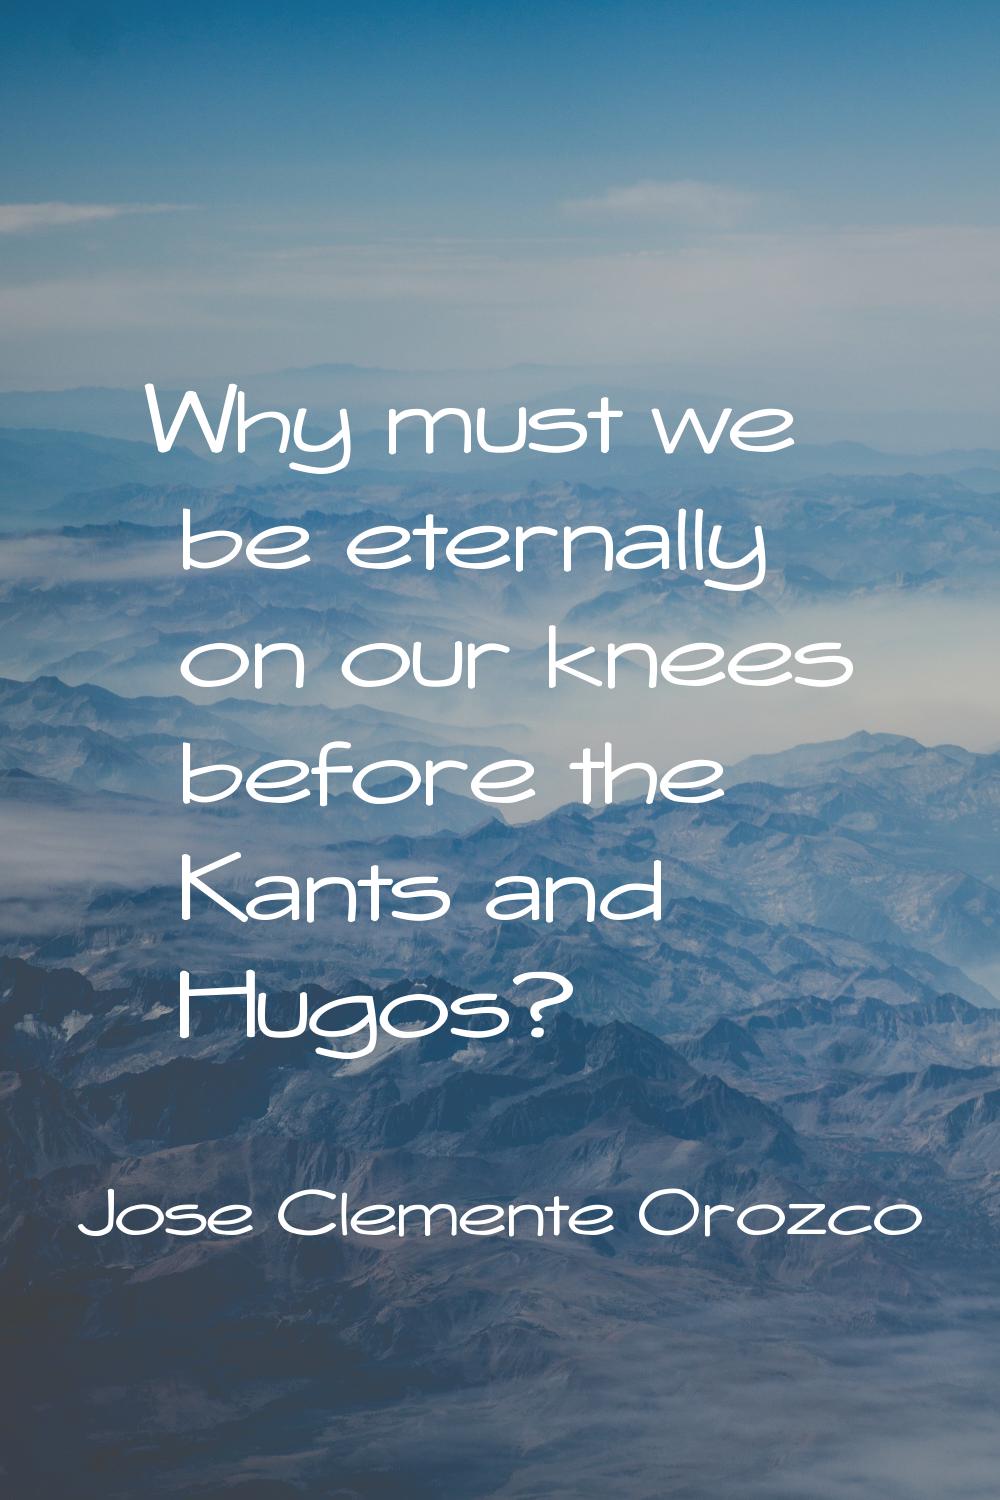 Why must we be eternally on our knees before the Kants and Hugos?